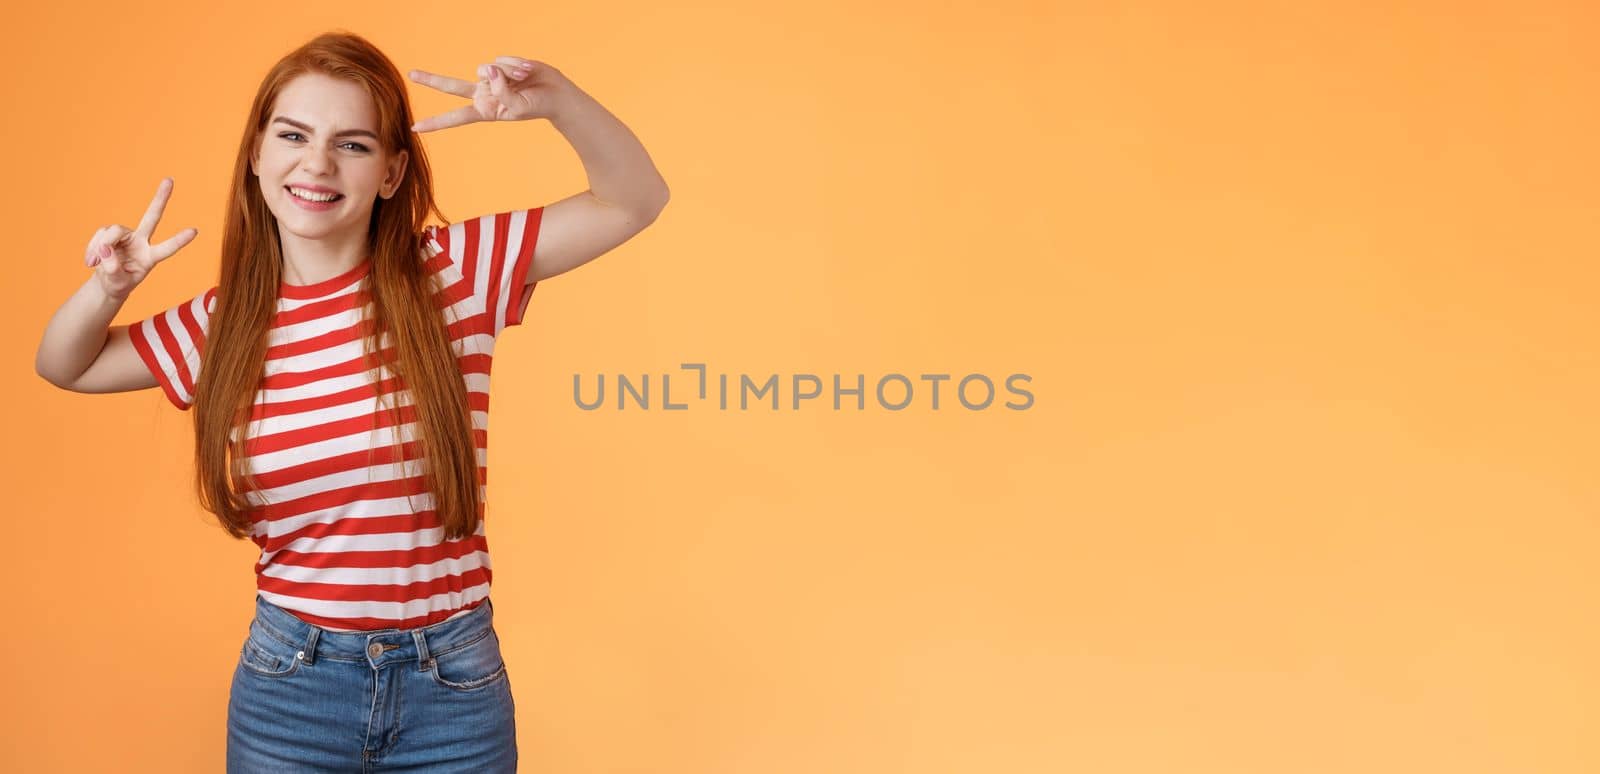 Friendly upbeat good-looking redhead woman rejoicing, feel happy, enjoy summetime, take first photo vacation, send coworkers summer shot, make peace victory signs, smiling broadly orange background.